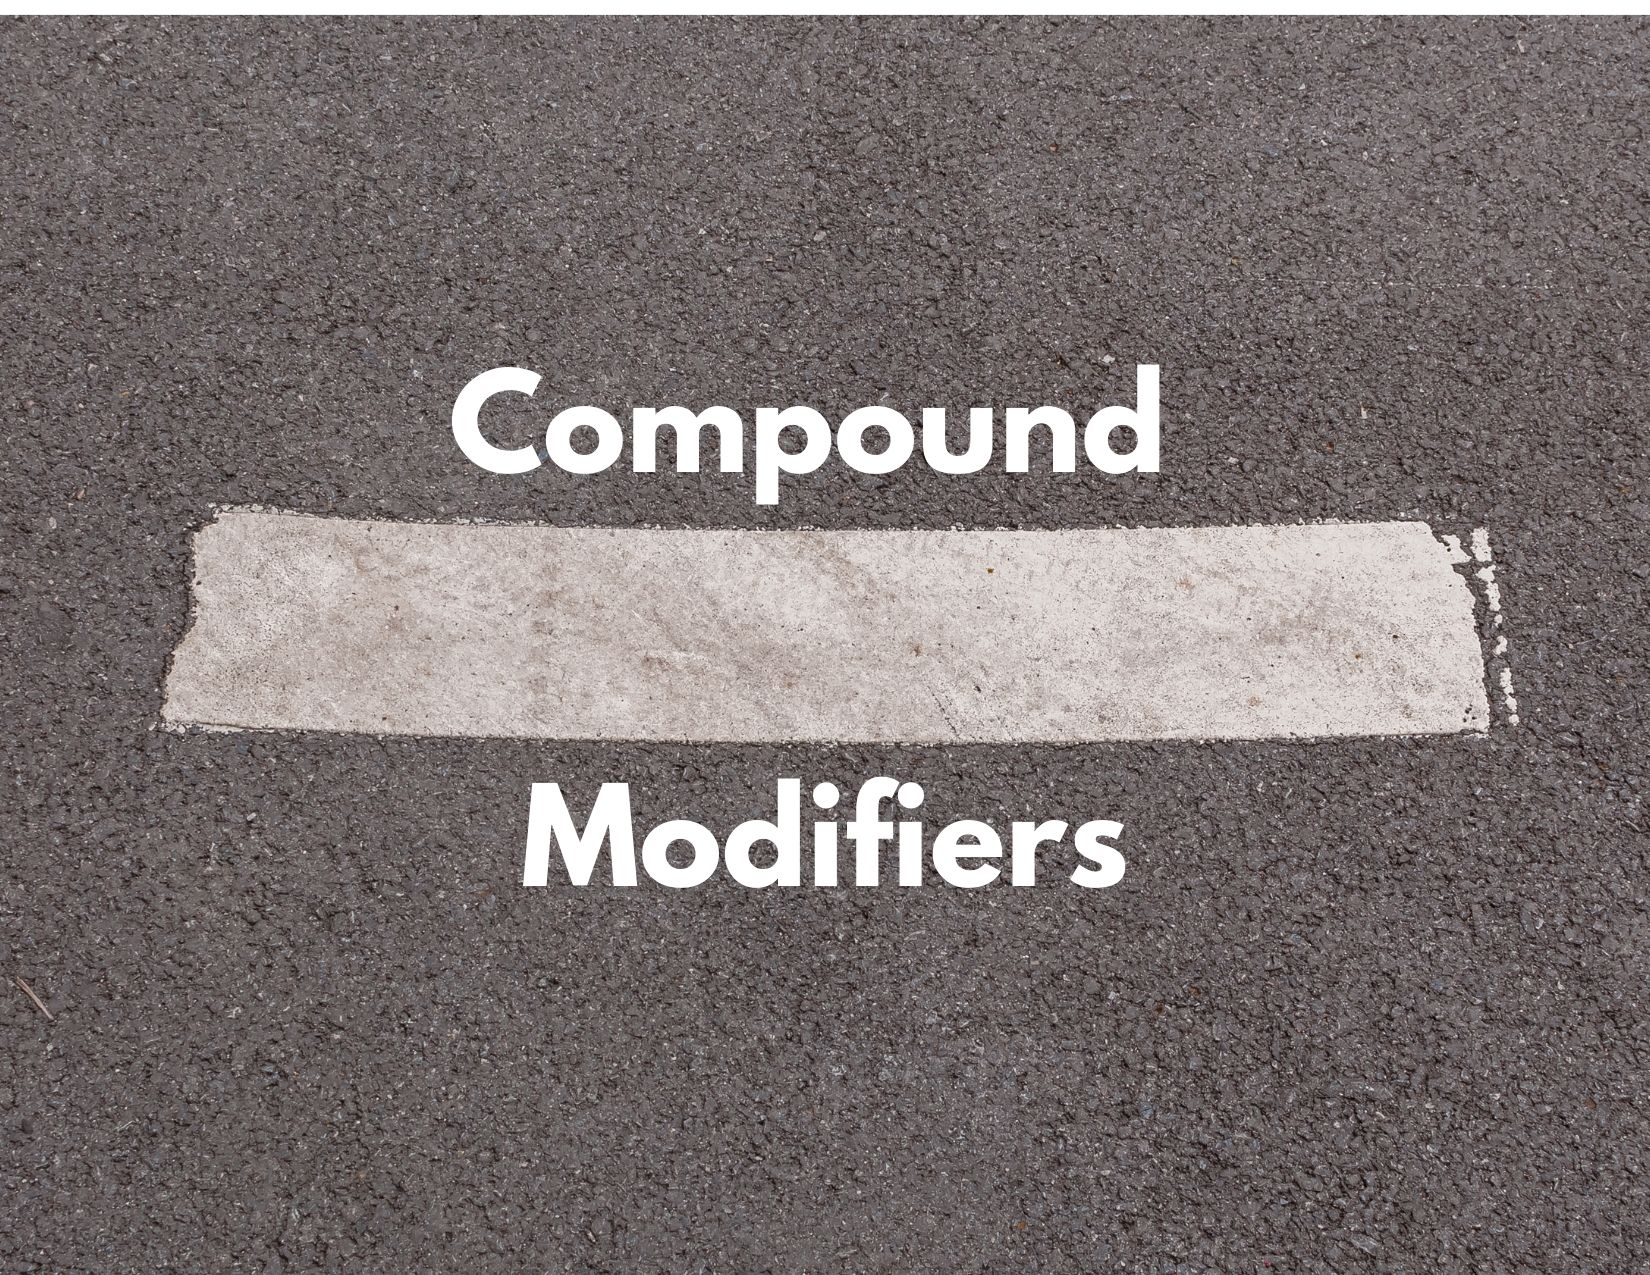 A graphic showing a strip on the ground representing a hyphen with the words Compound Modifiers